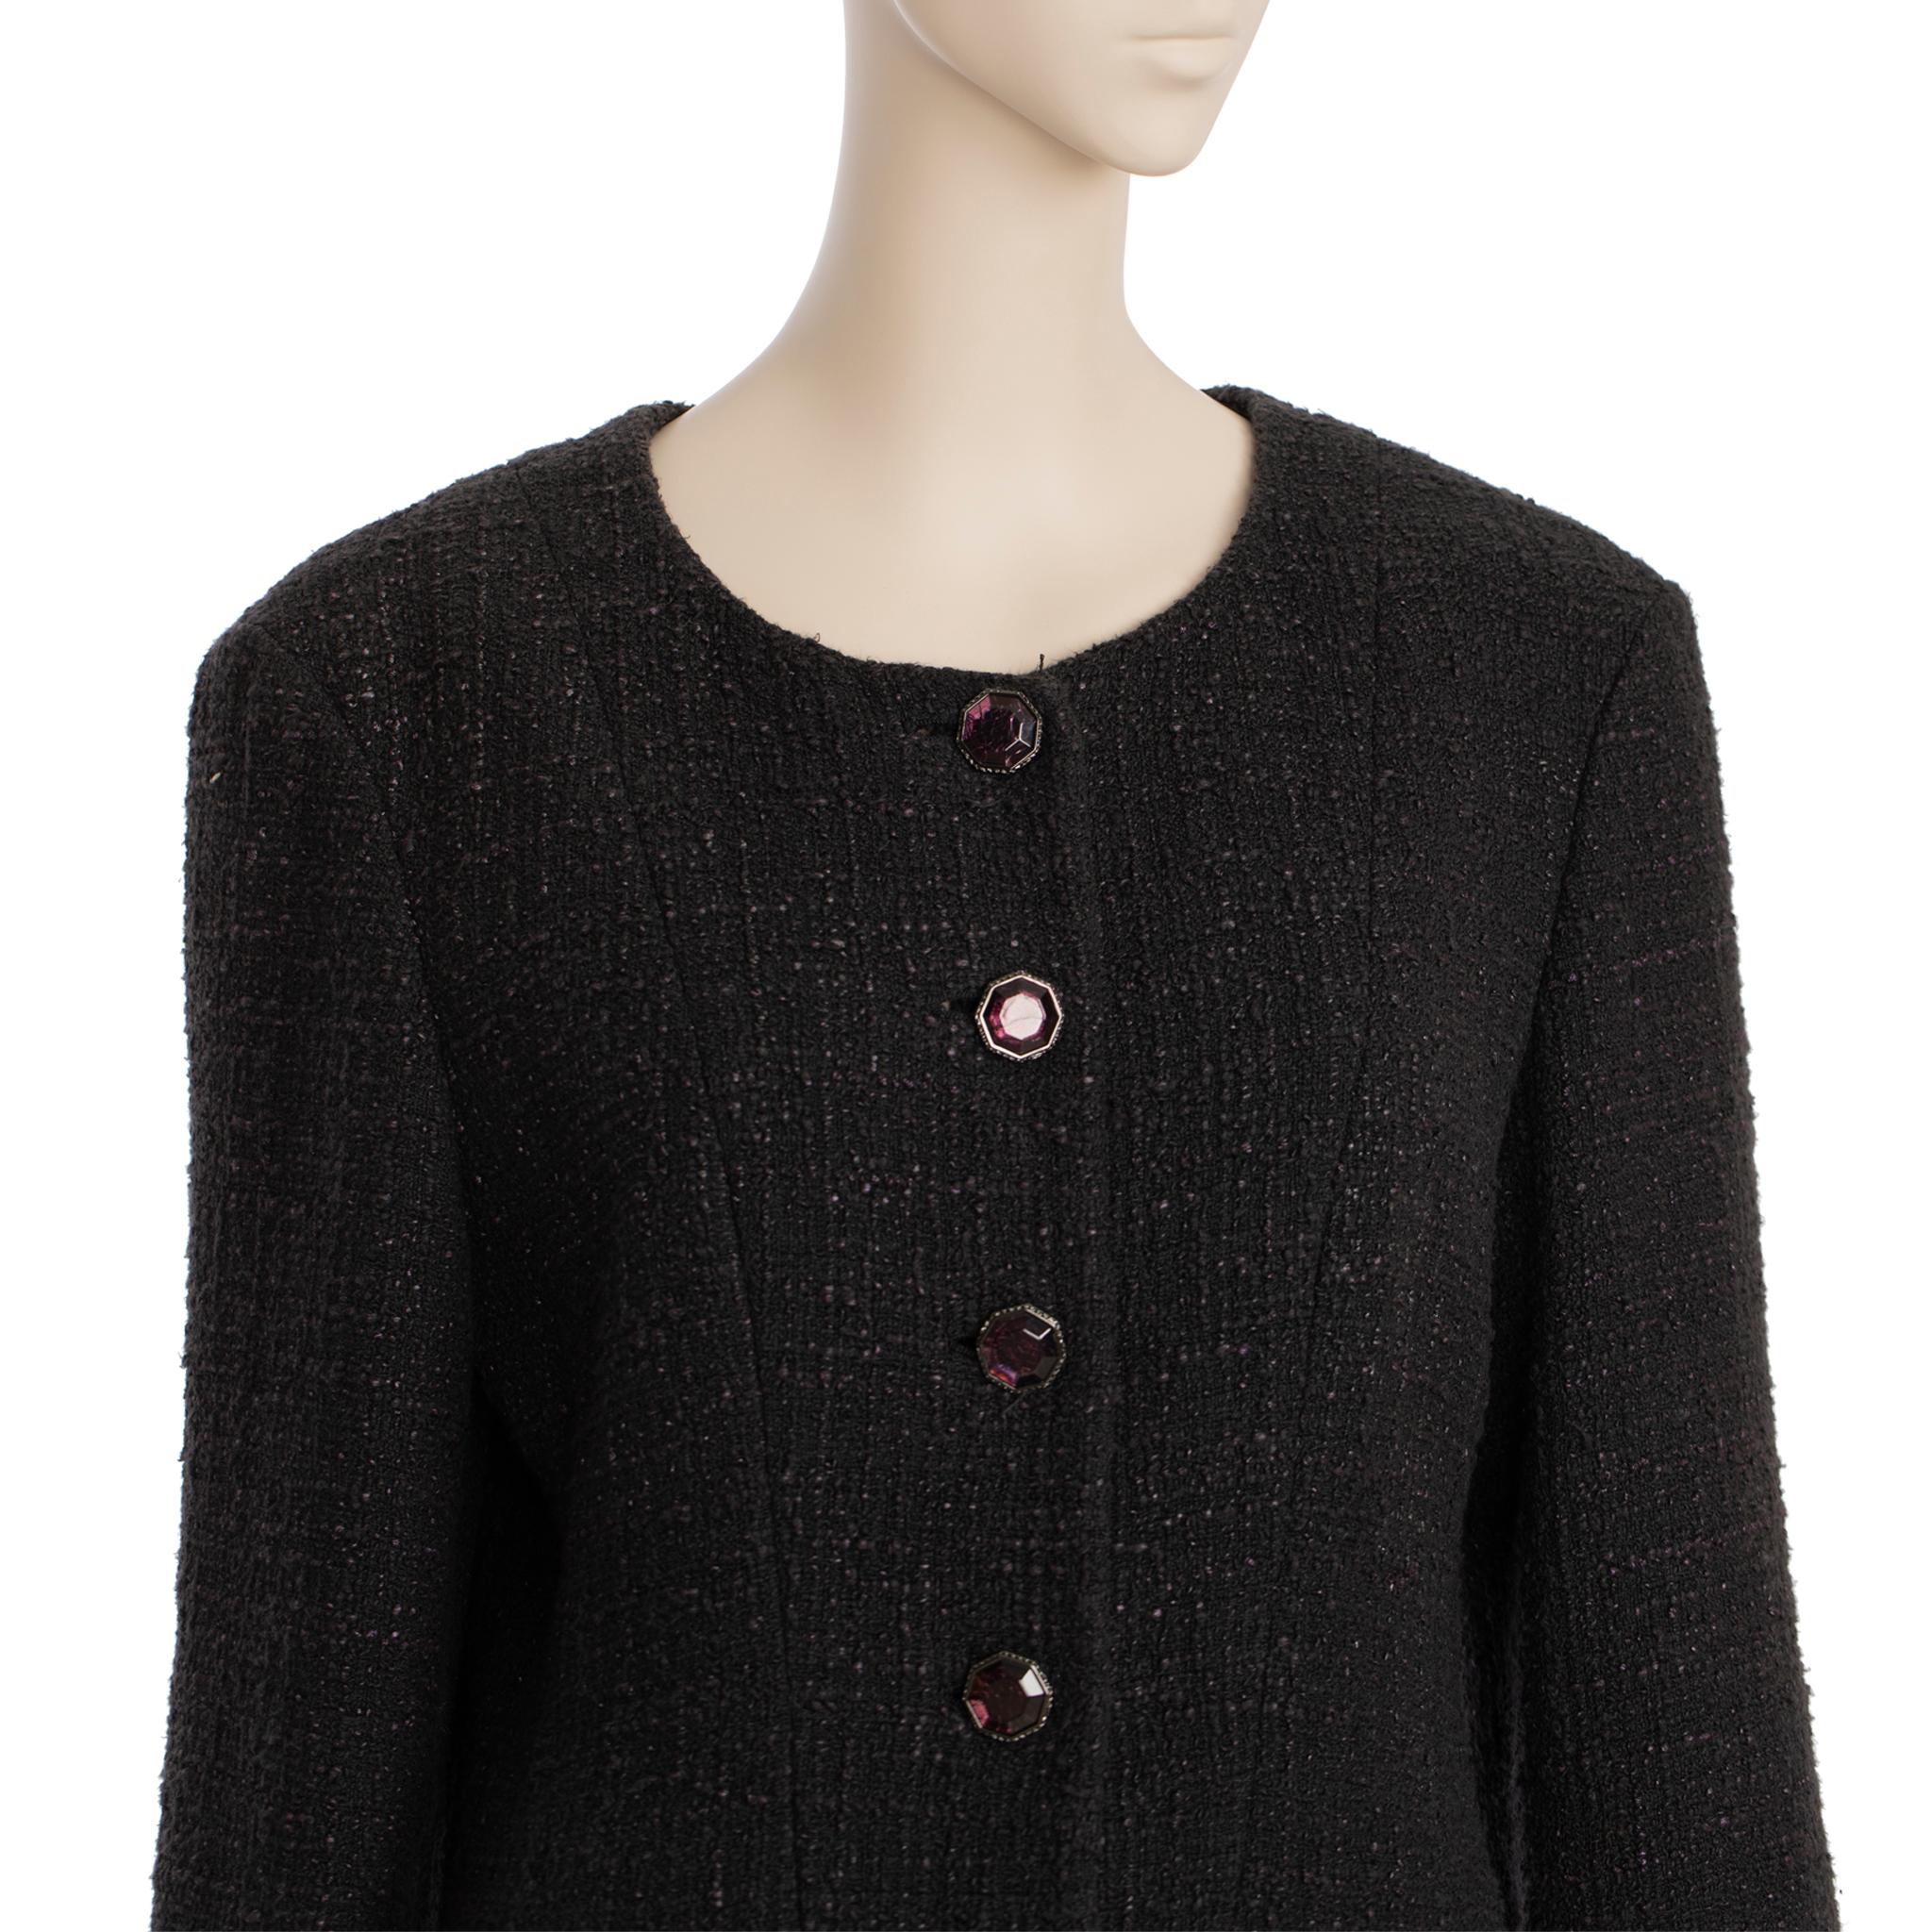 Chanel Tweed Multi-button Crew Neck Jacket 40 FR For Sale 7